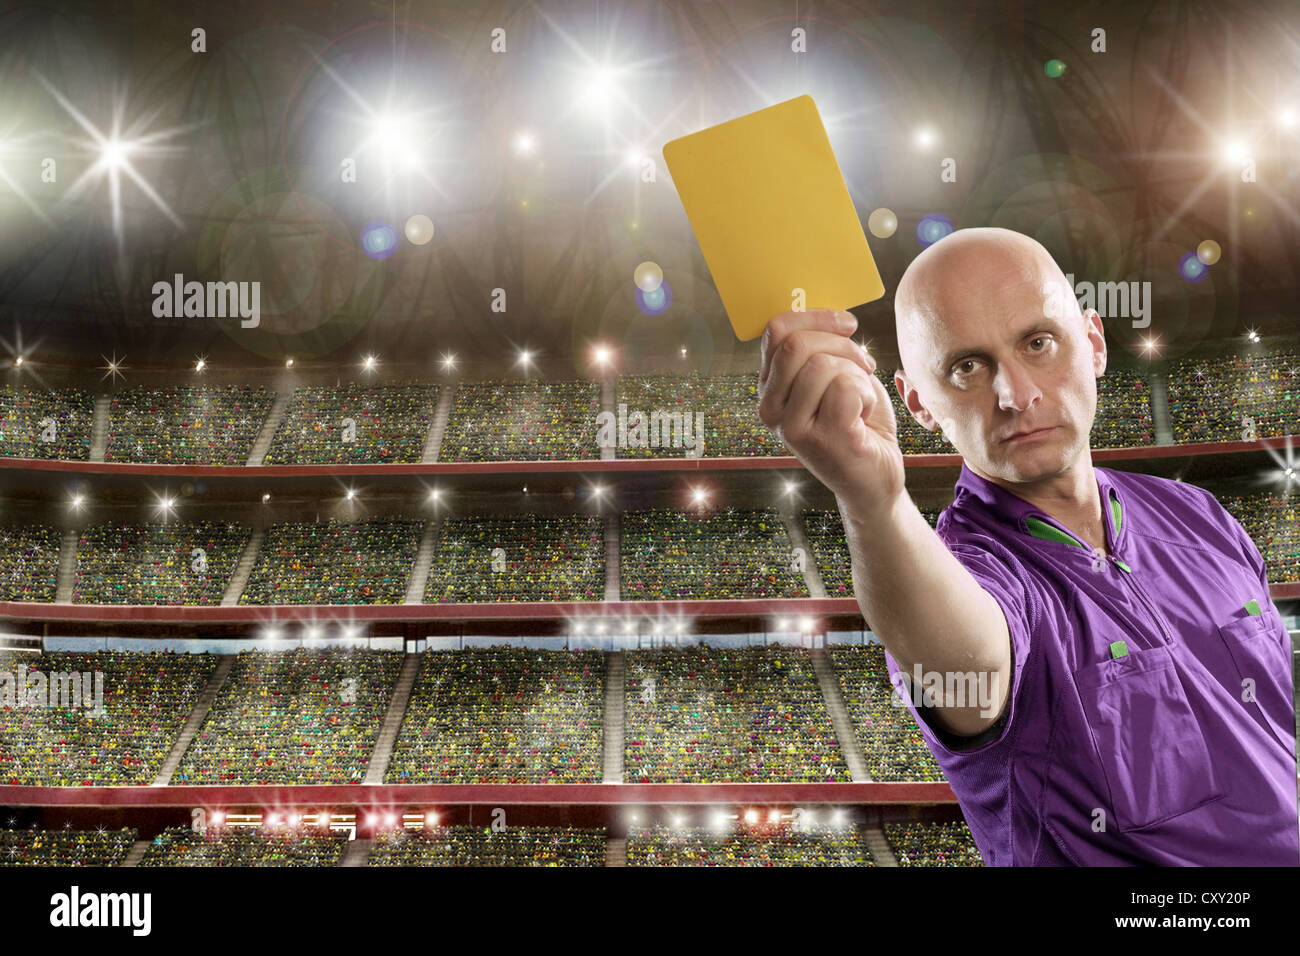 Referee holding a yellow card Stock Photo